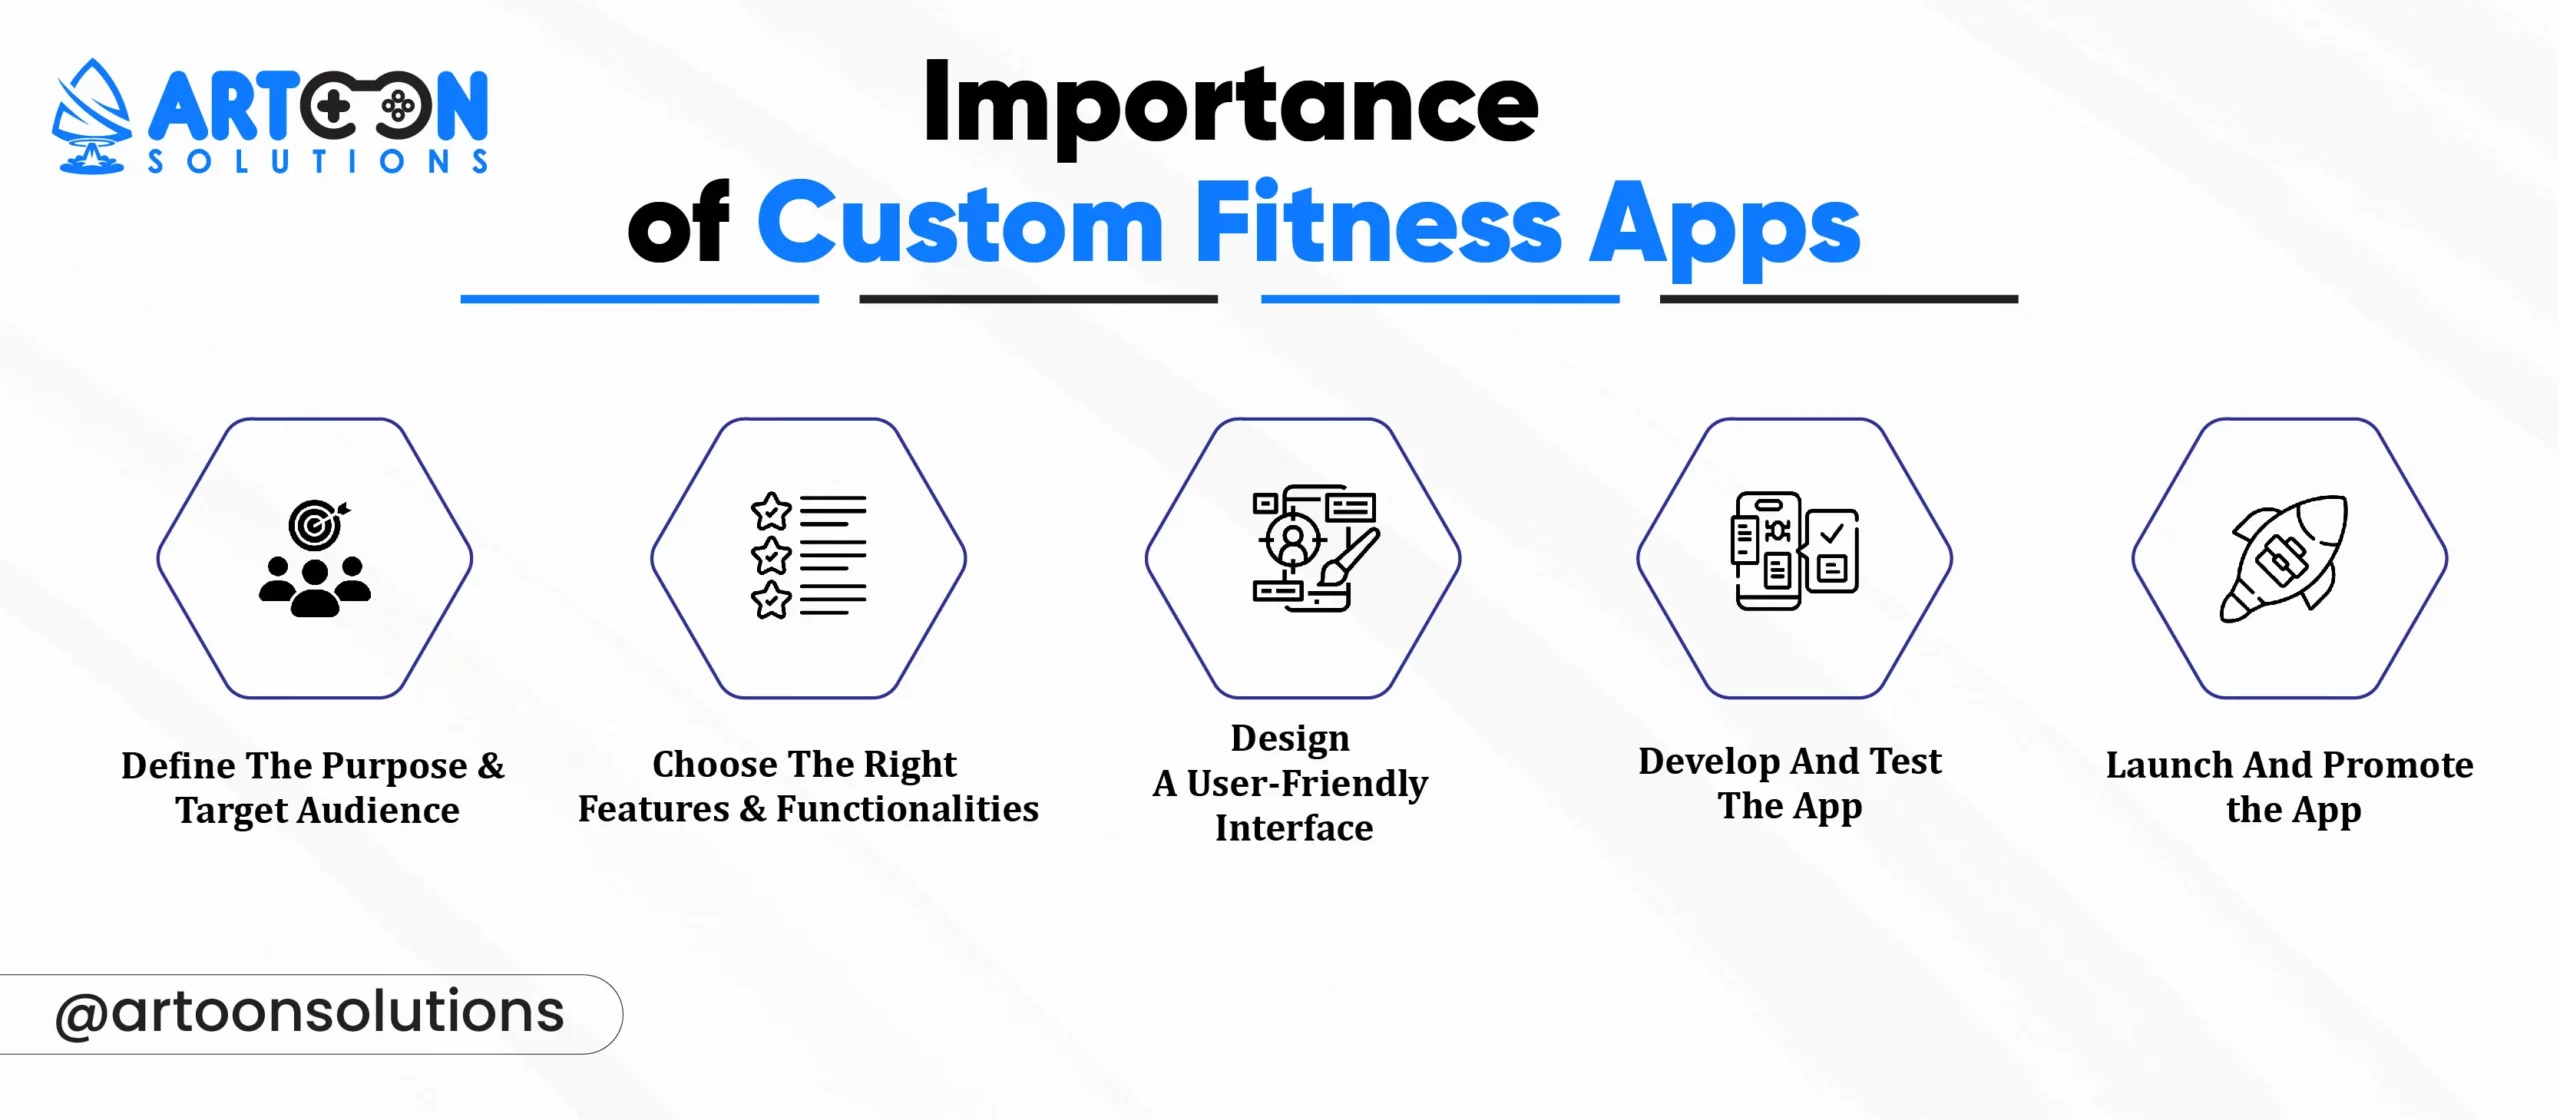 Importance of Custom Fitness Apps